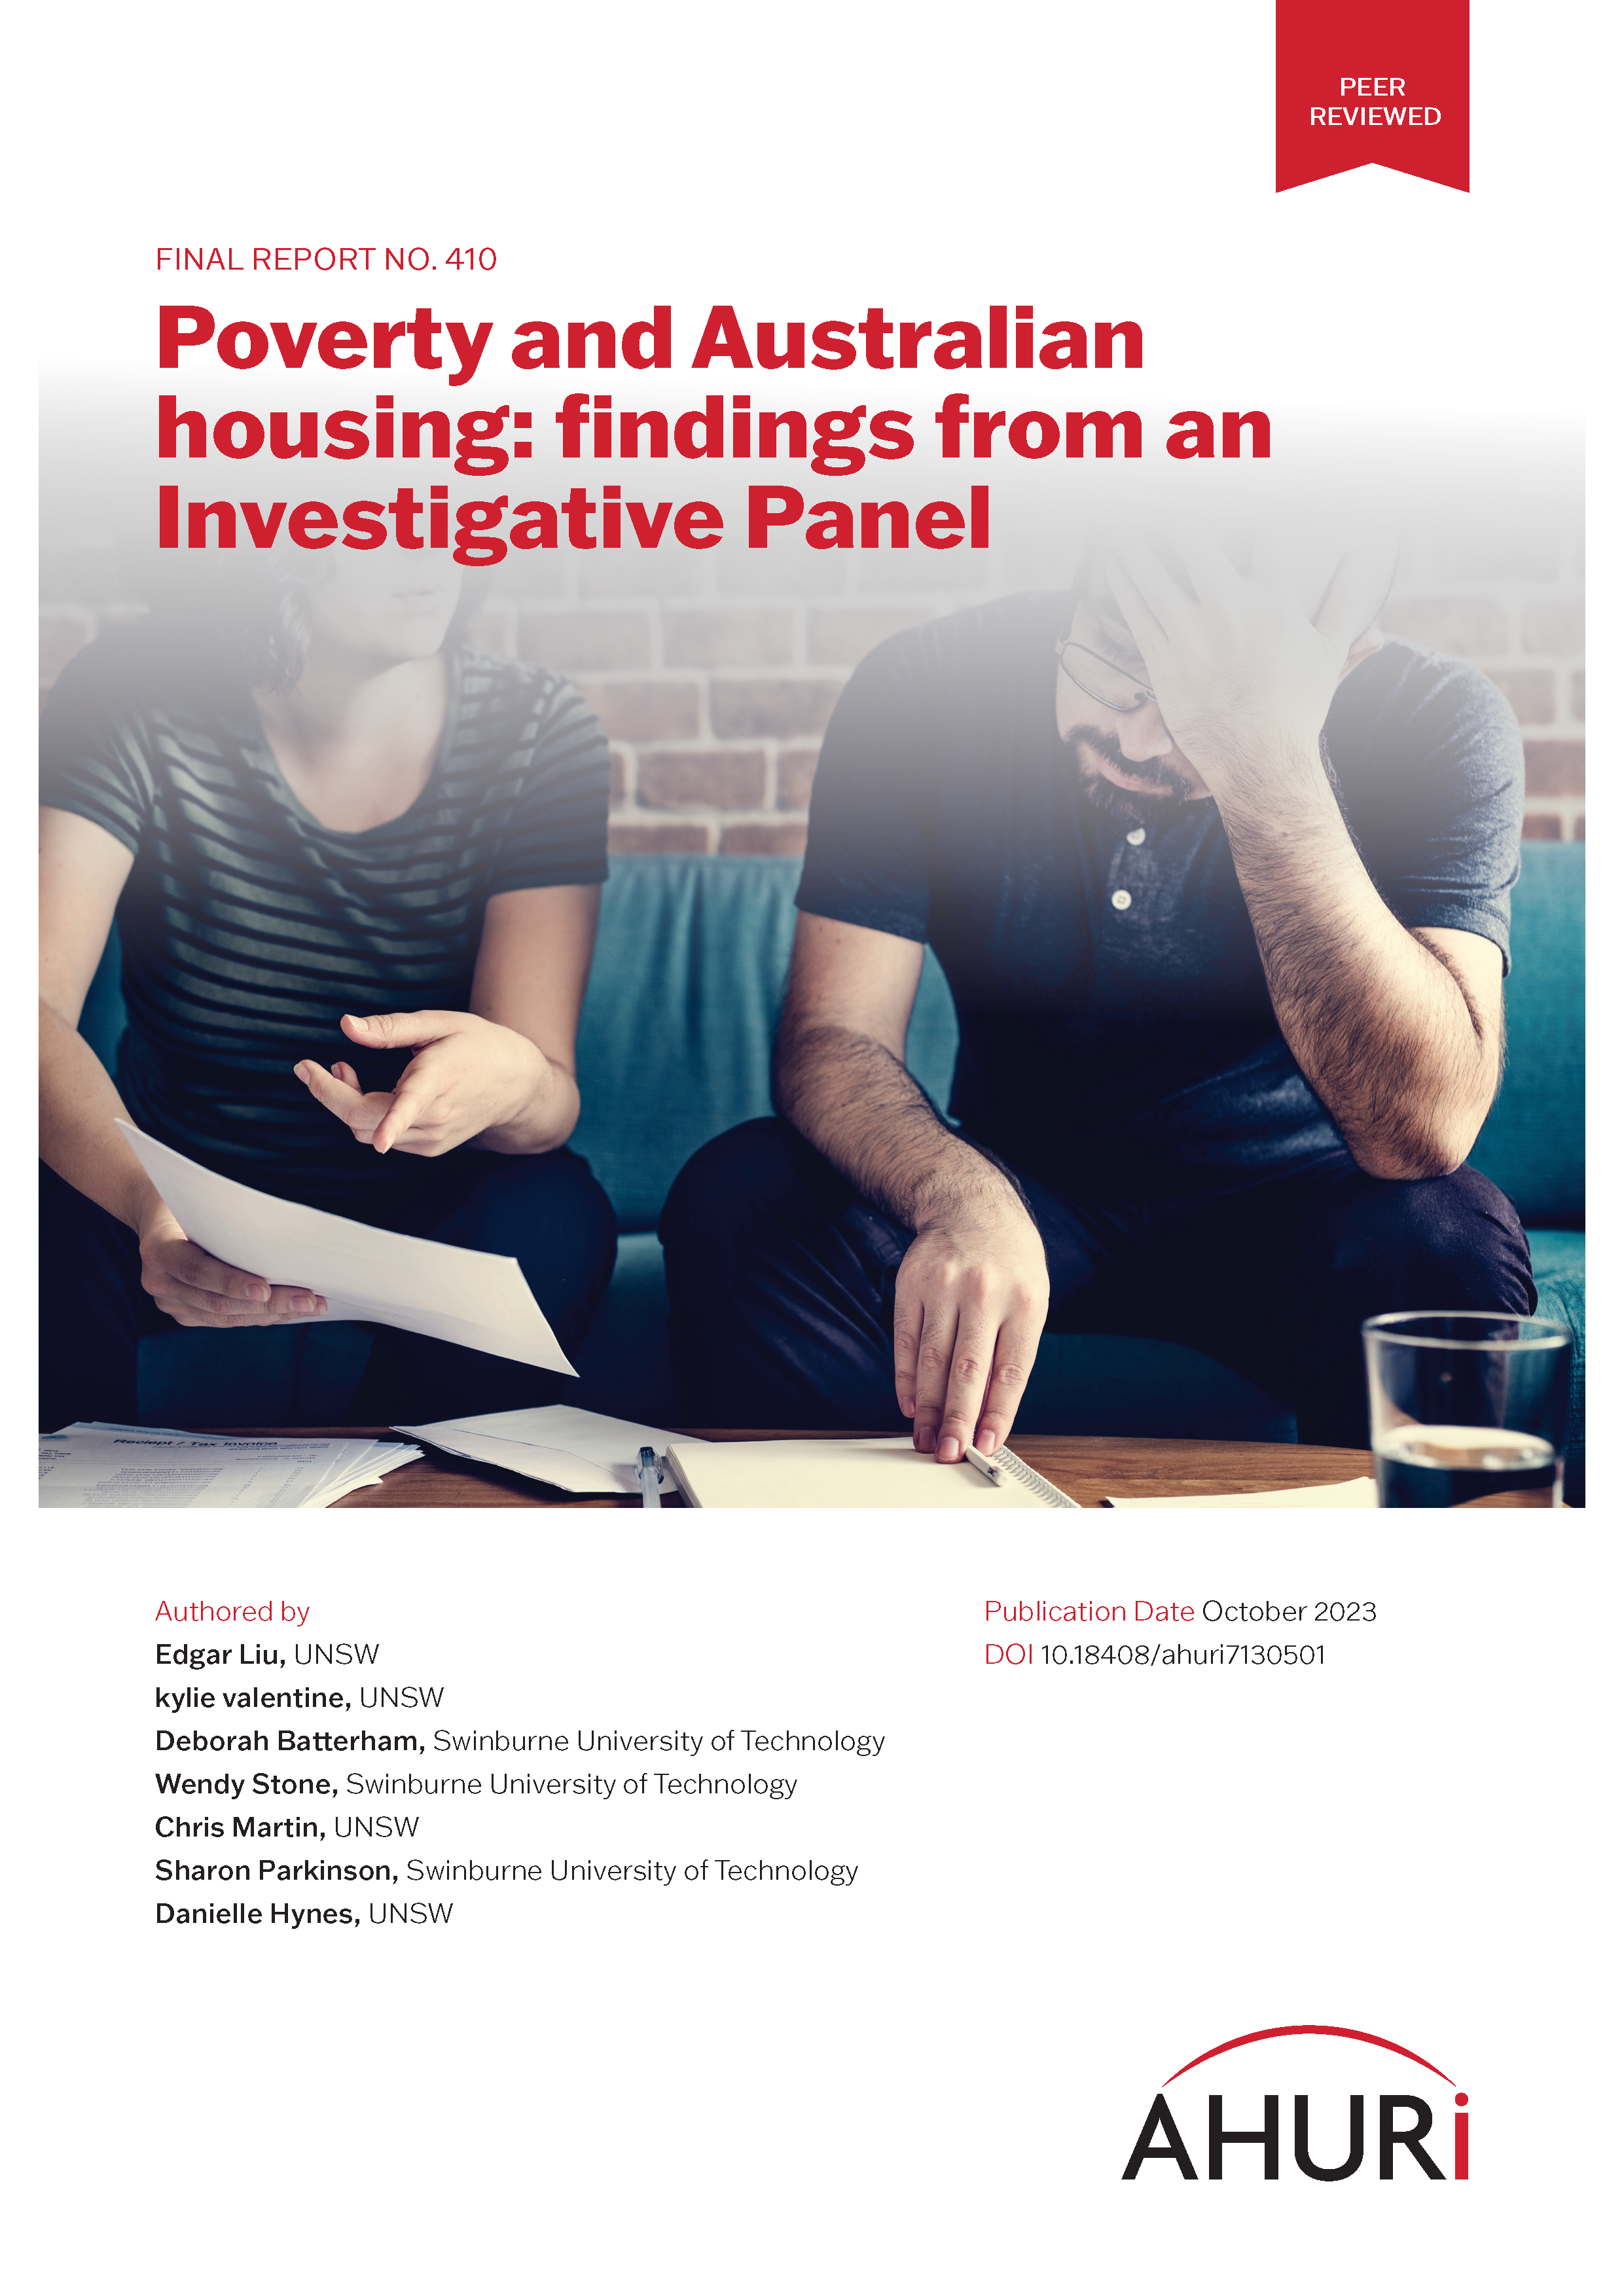 Poverty and Australian housing: findings from an Investigative Panel